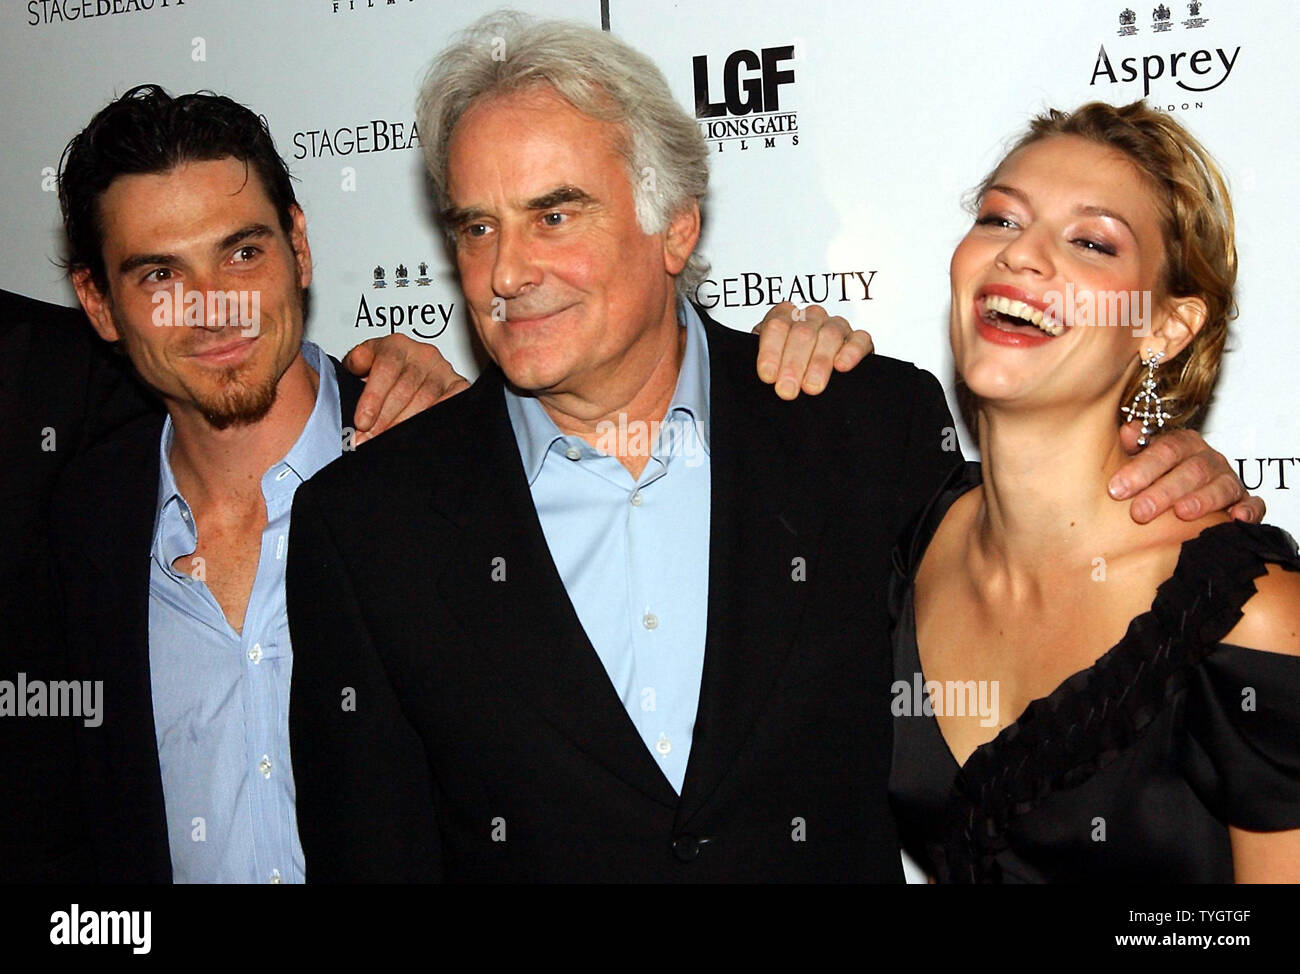 Actors  Billy Crudup and Claire Danes who became lovers on the set of their latest film 'Stage Beauty' succeed in not beign  photographed together during promotional stints  by placing the film's director Richard Eyre (center) between them at the Oct. 4, 2004 New York premiere of 'Stage Beauty'  (UPI Photo/Ezio Petersen) Stock Photo